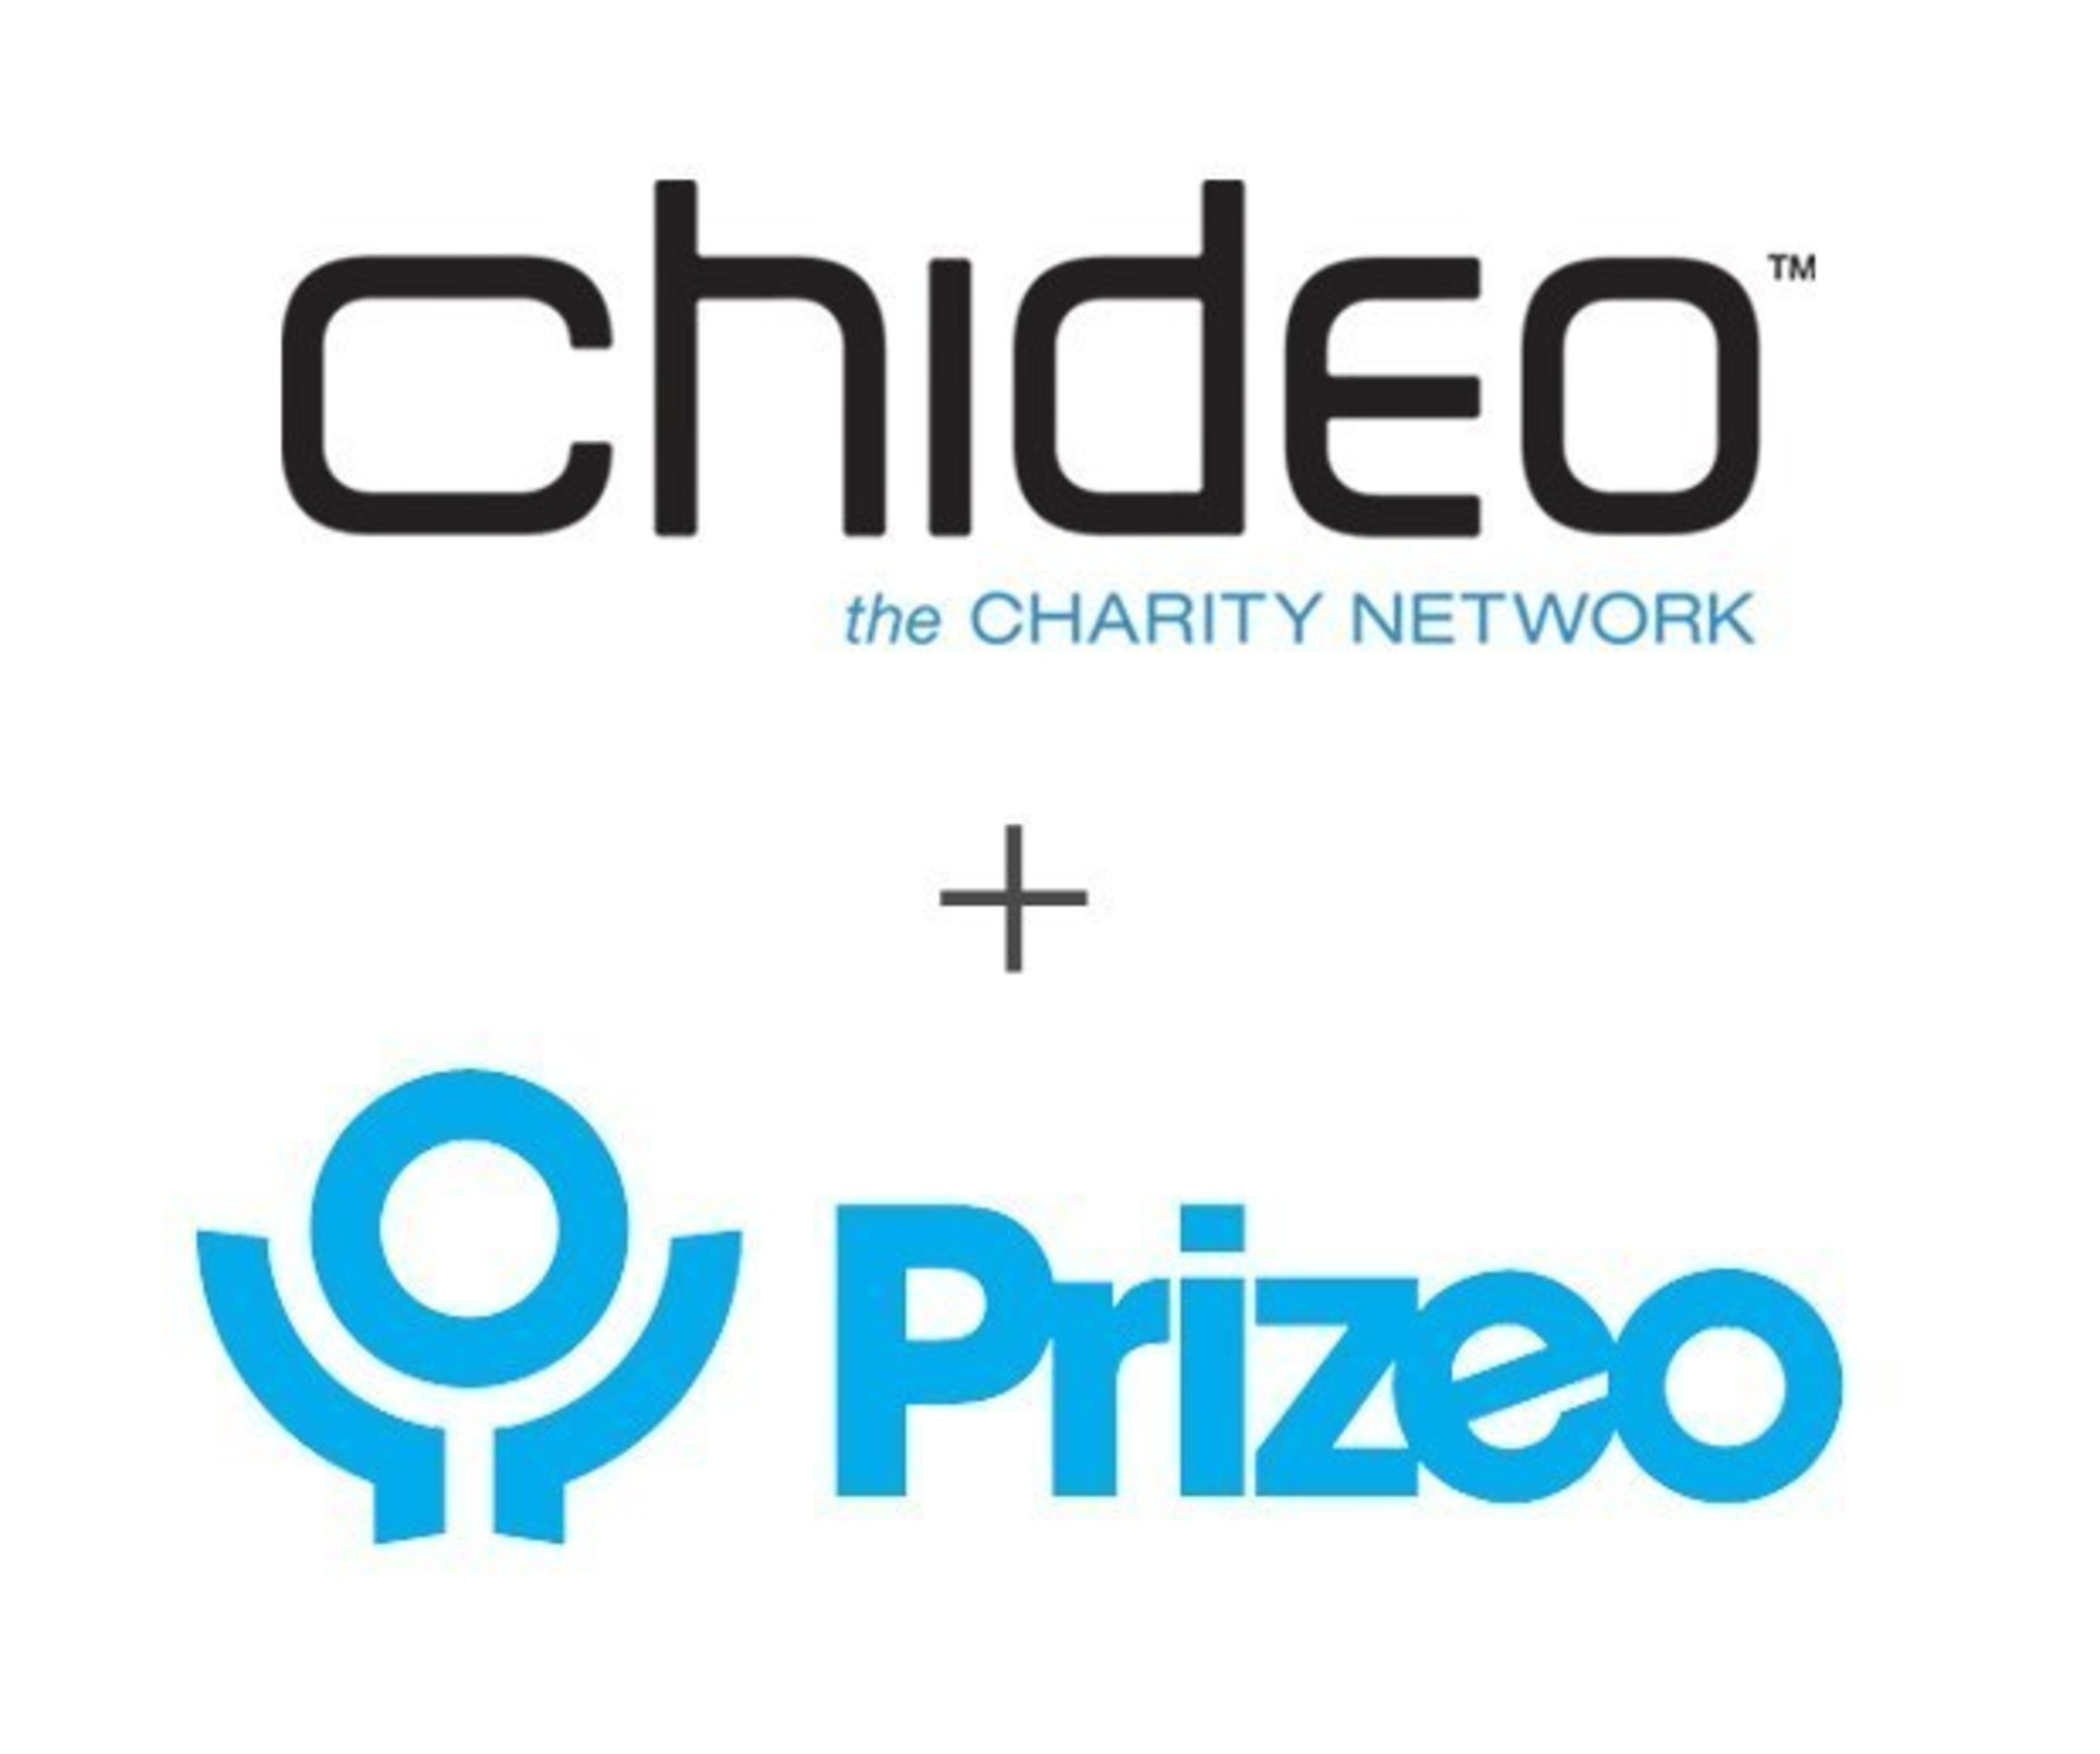 Entrepreneur and Philanthropist Todd Wagner Acquires Celebrity-Based Charitable fundraising platform Prizeo to Partner with His Current Company Chideo, The Charity Network